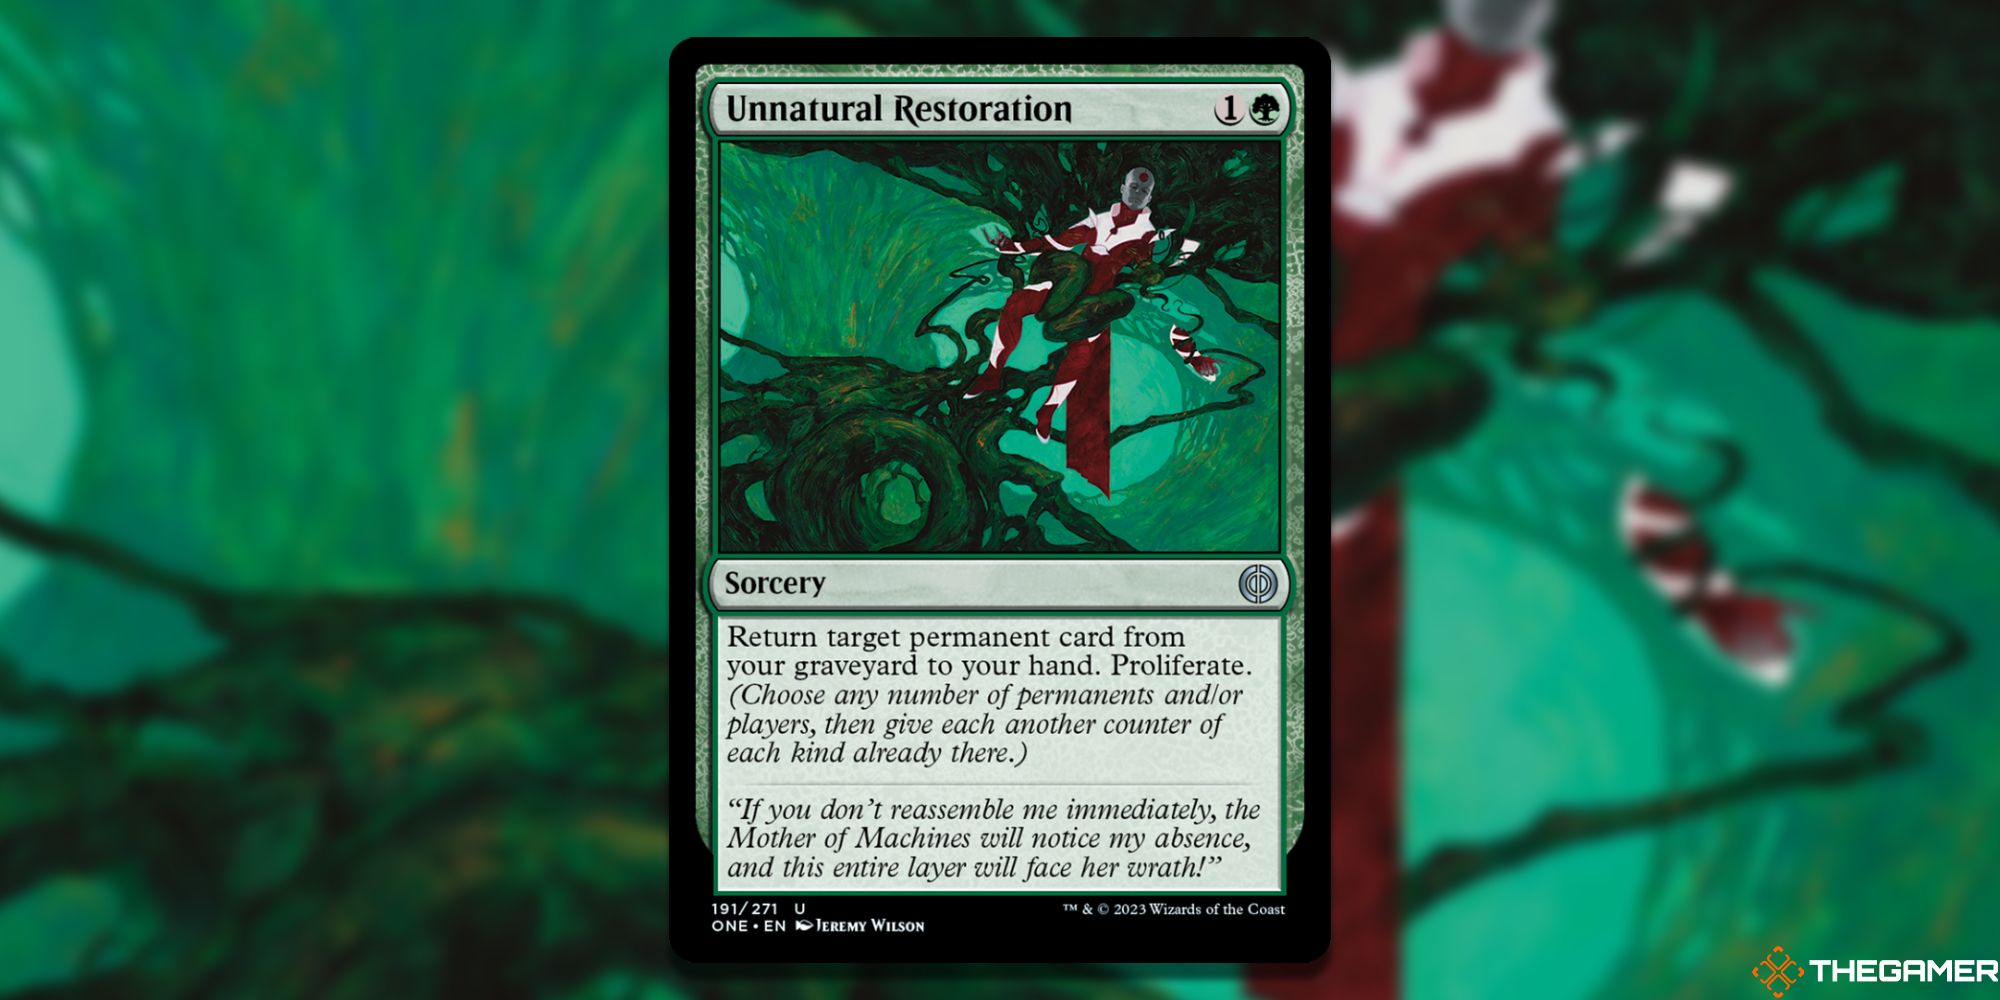 The card Unnatural Restoration from Magic: The Gathering.